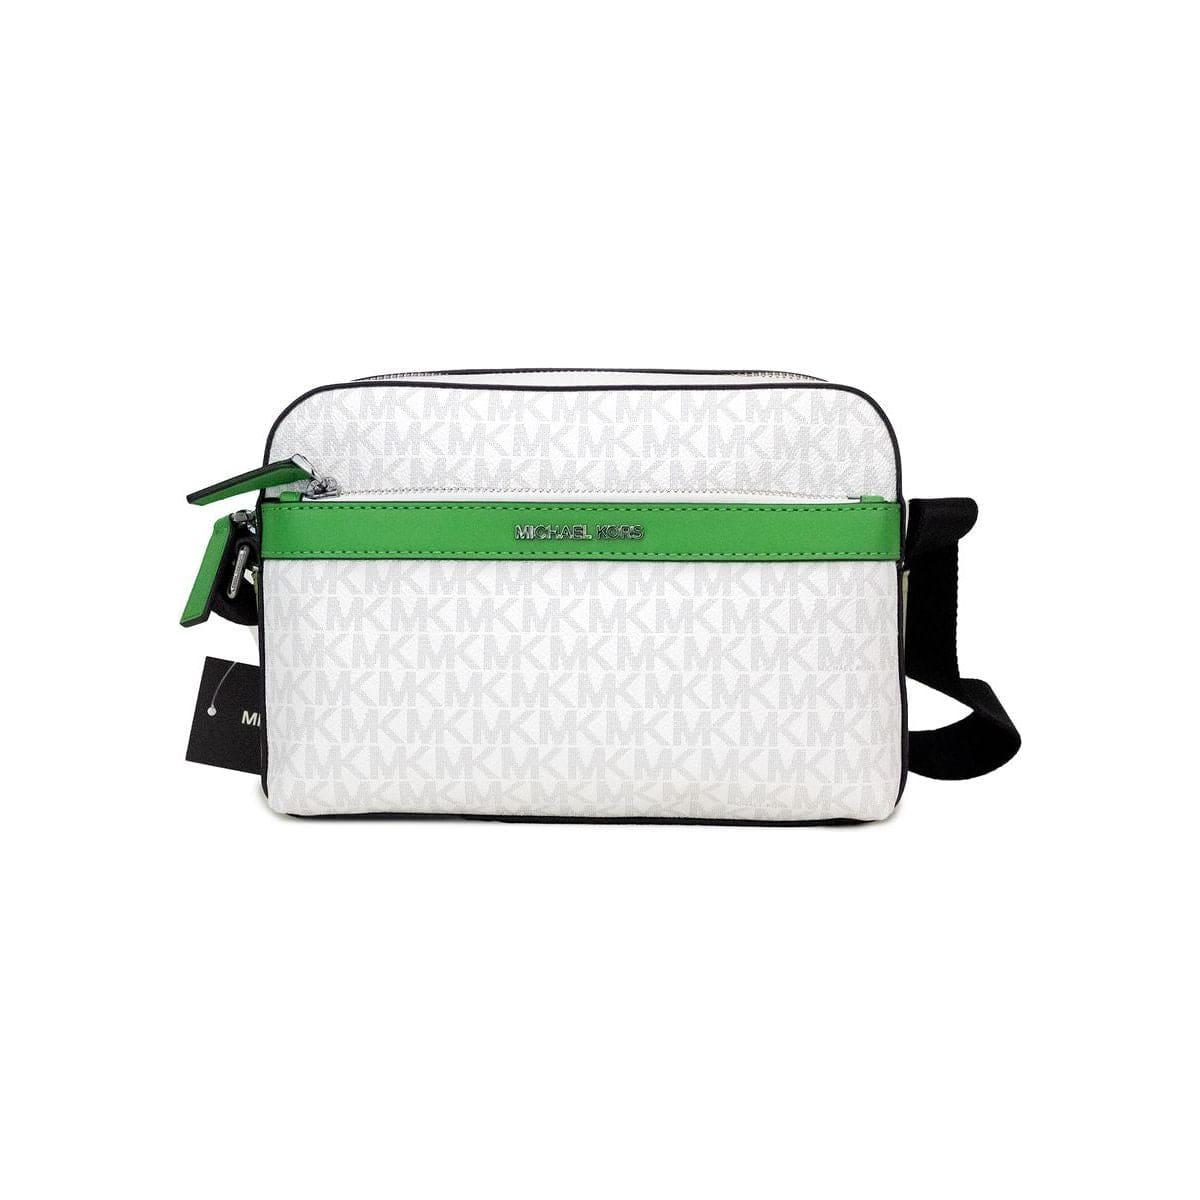 MICHAEL KORS Bright White Palm Signature Cross body Bag - OBY BAGS